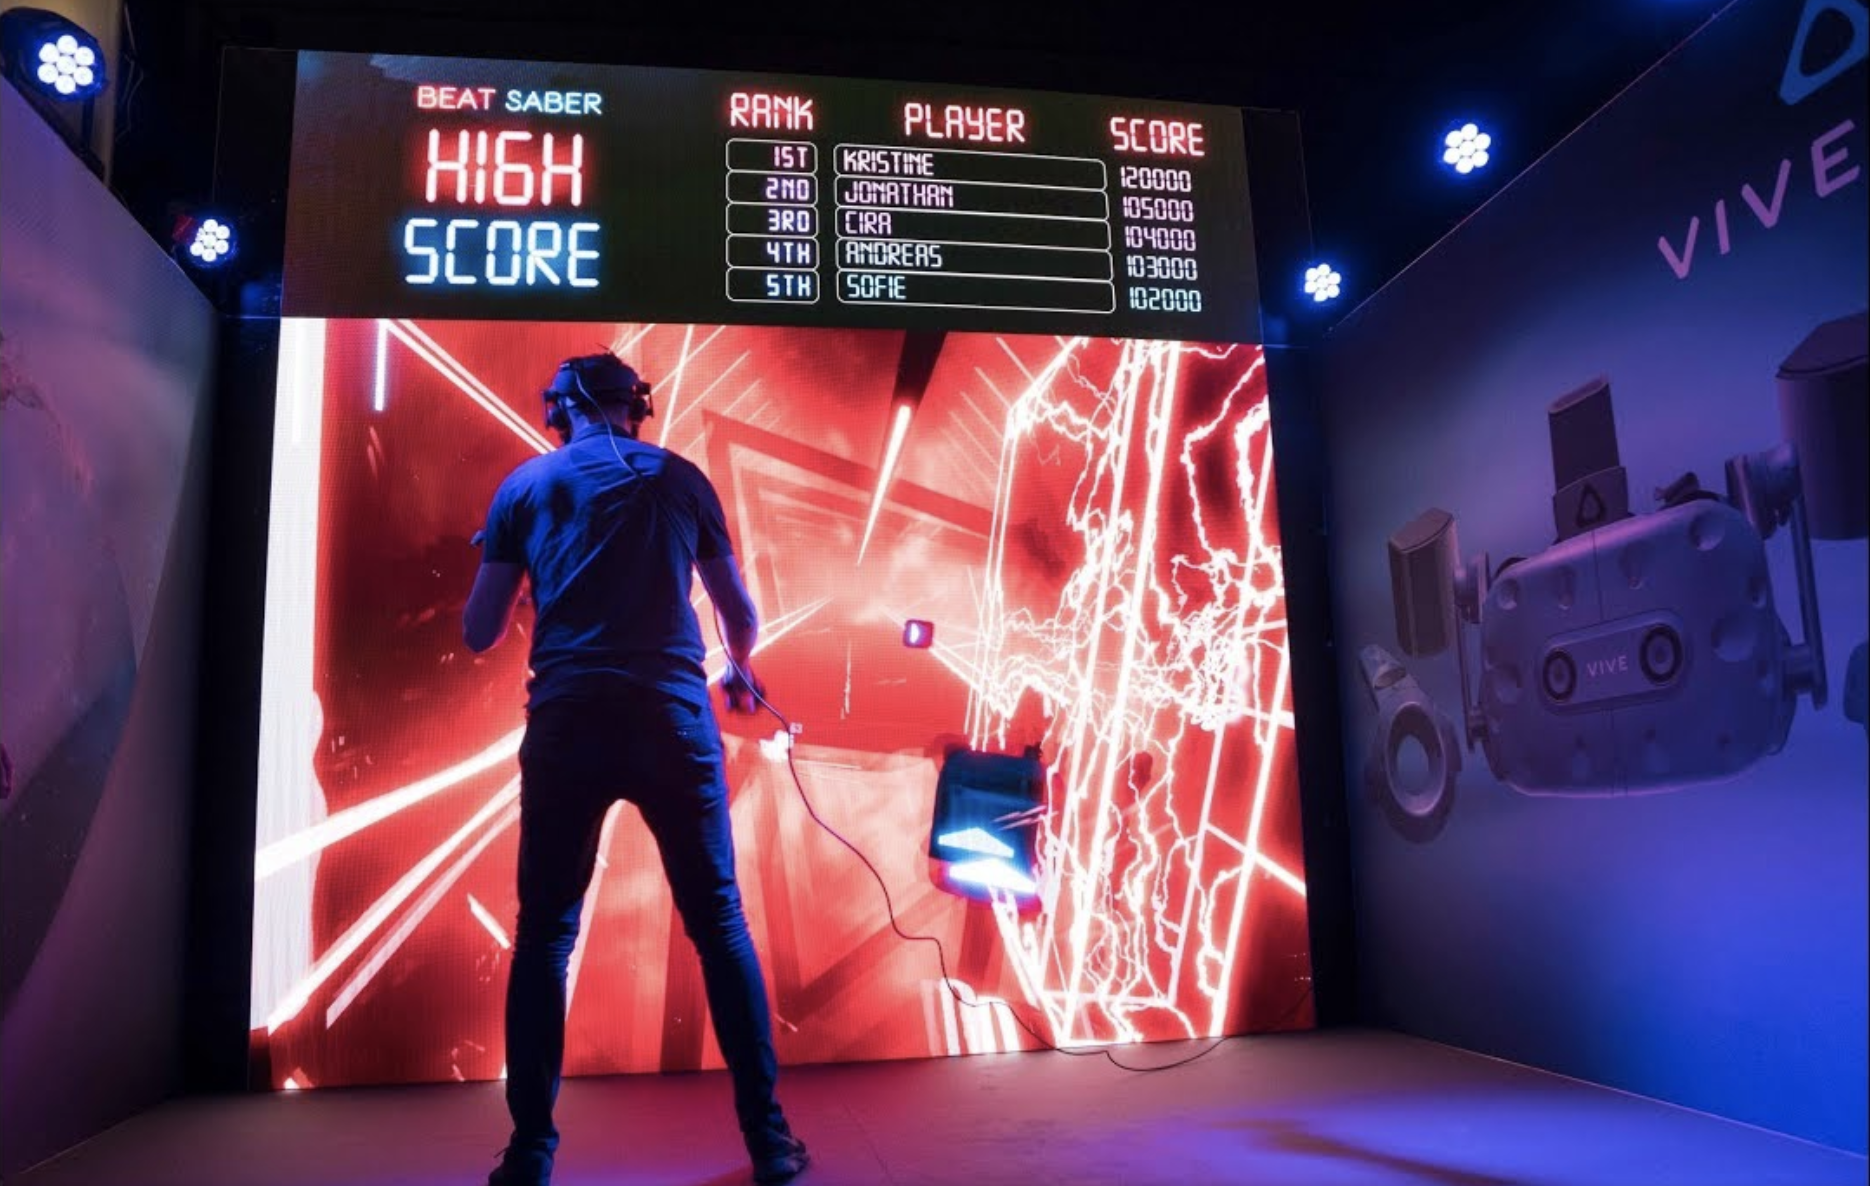 Creating Europe’s best VR Experience Together with HTC VIVE & BEAT SABER